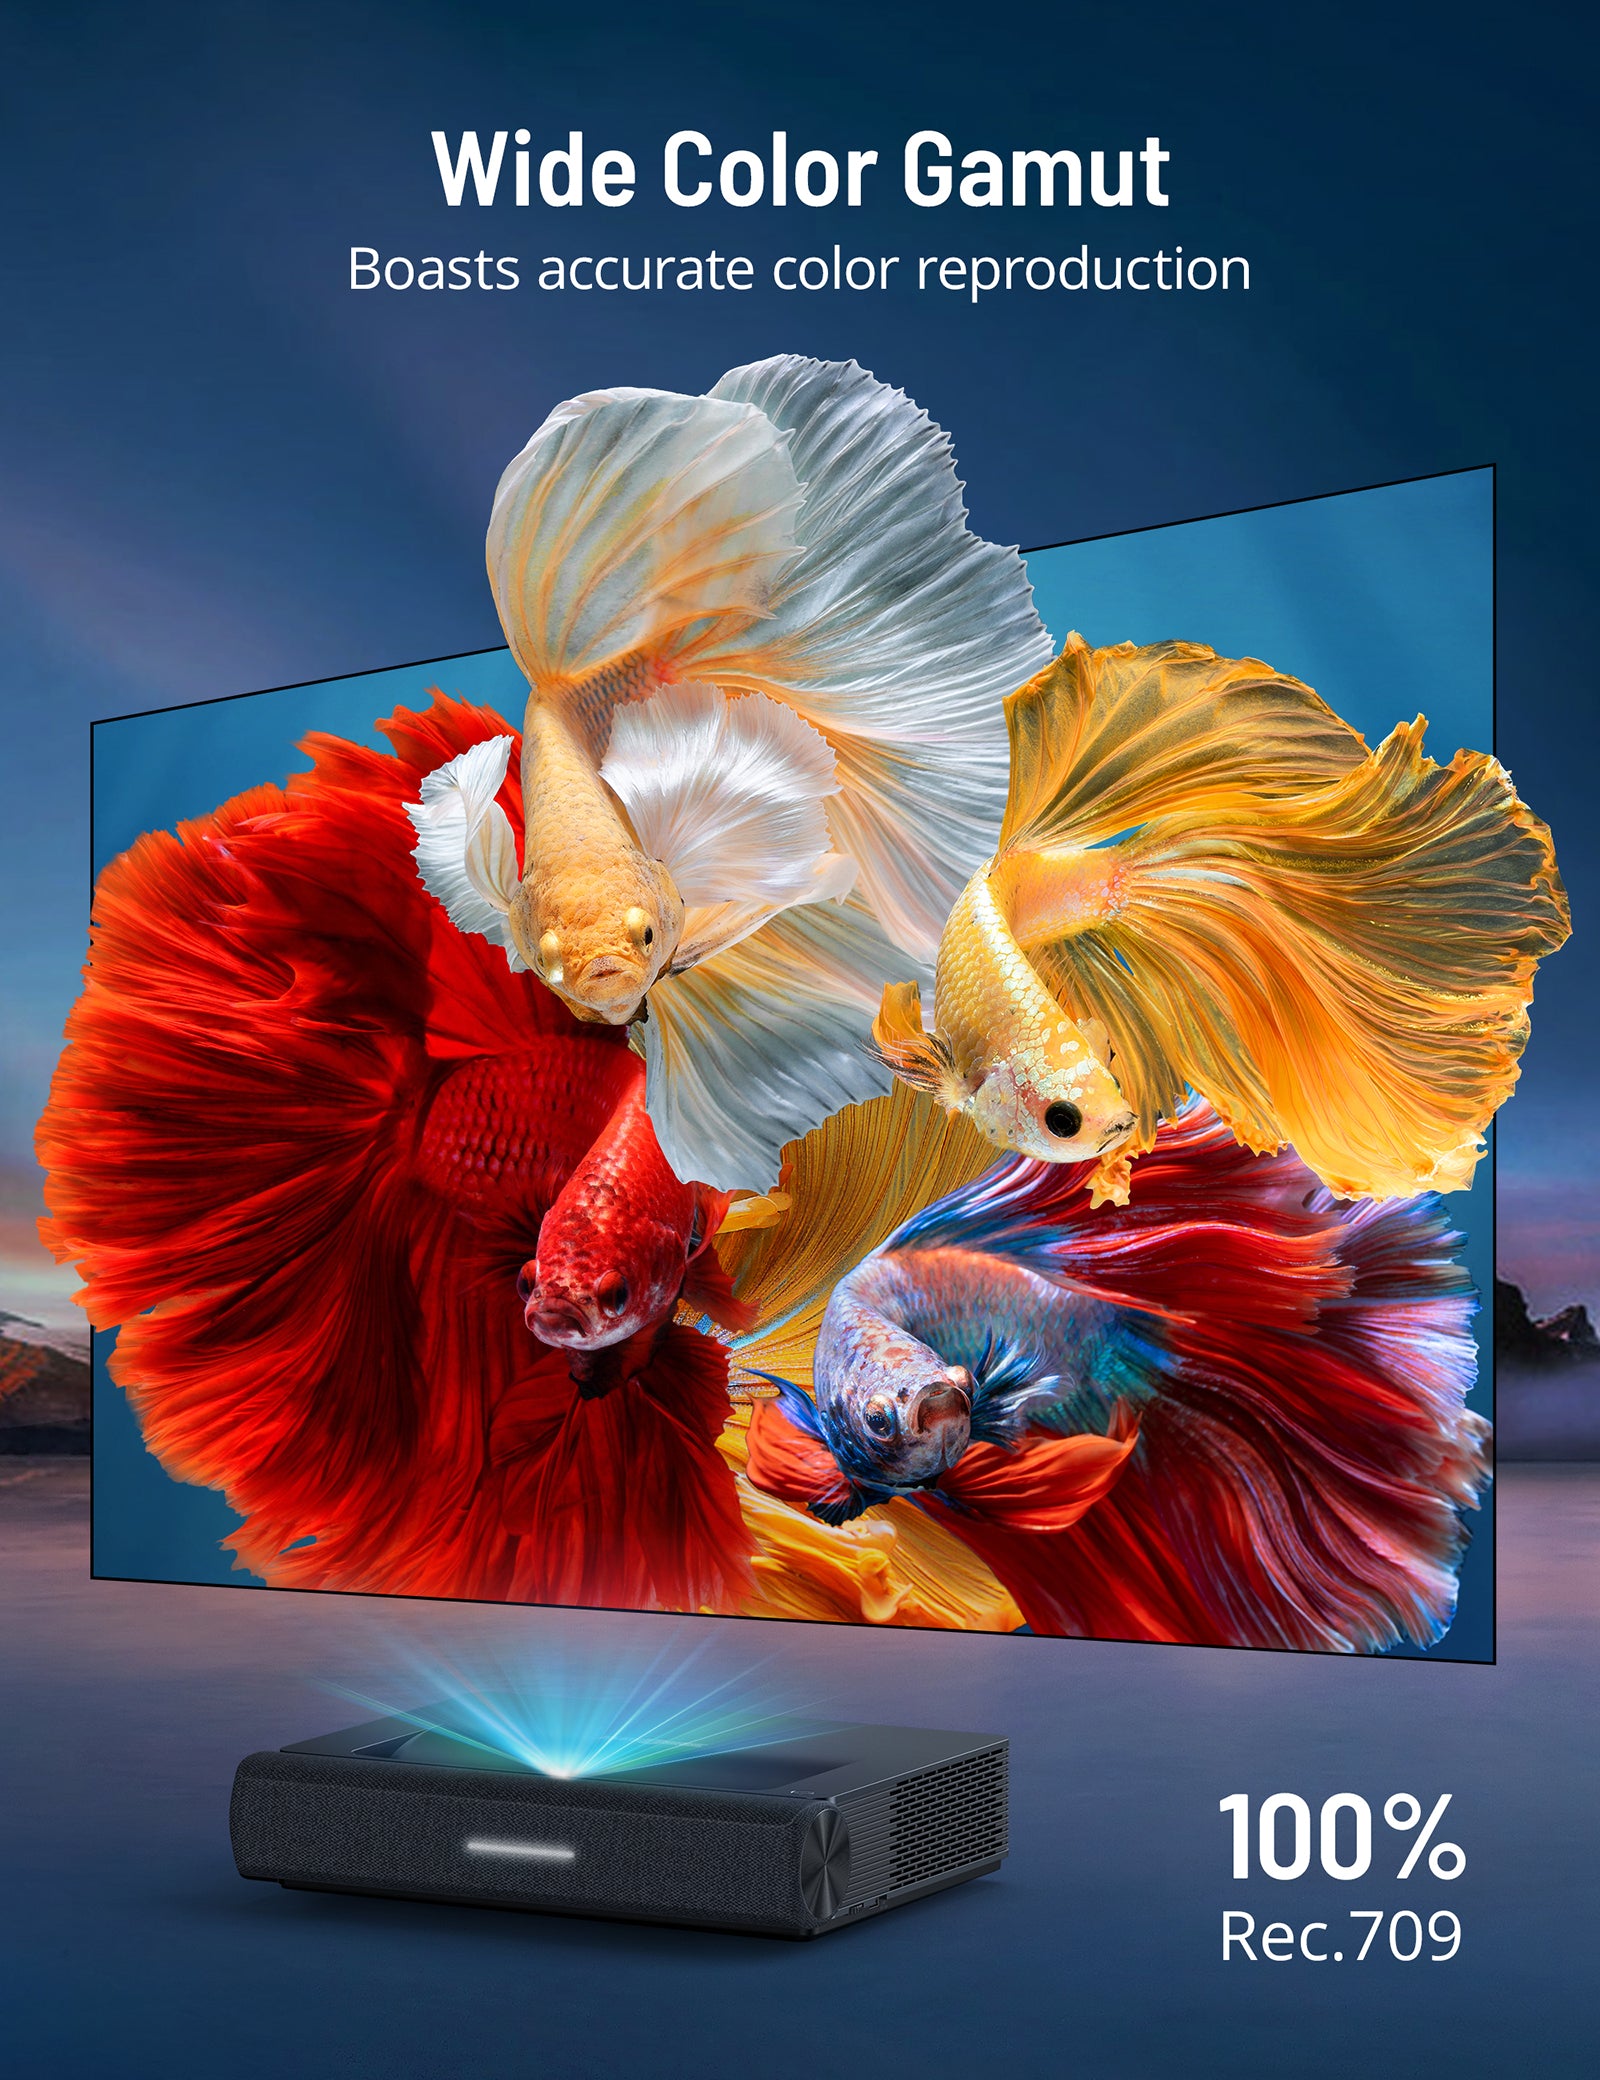 Paris Rhone 4K Laser Projector, Ultra Short Throw Laser TV, UHD DLP  Projector with 2000 ANSI, Dolby Audio, DTS Decoding